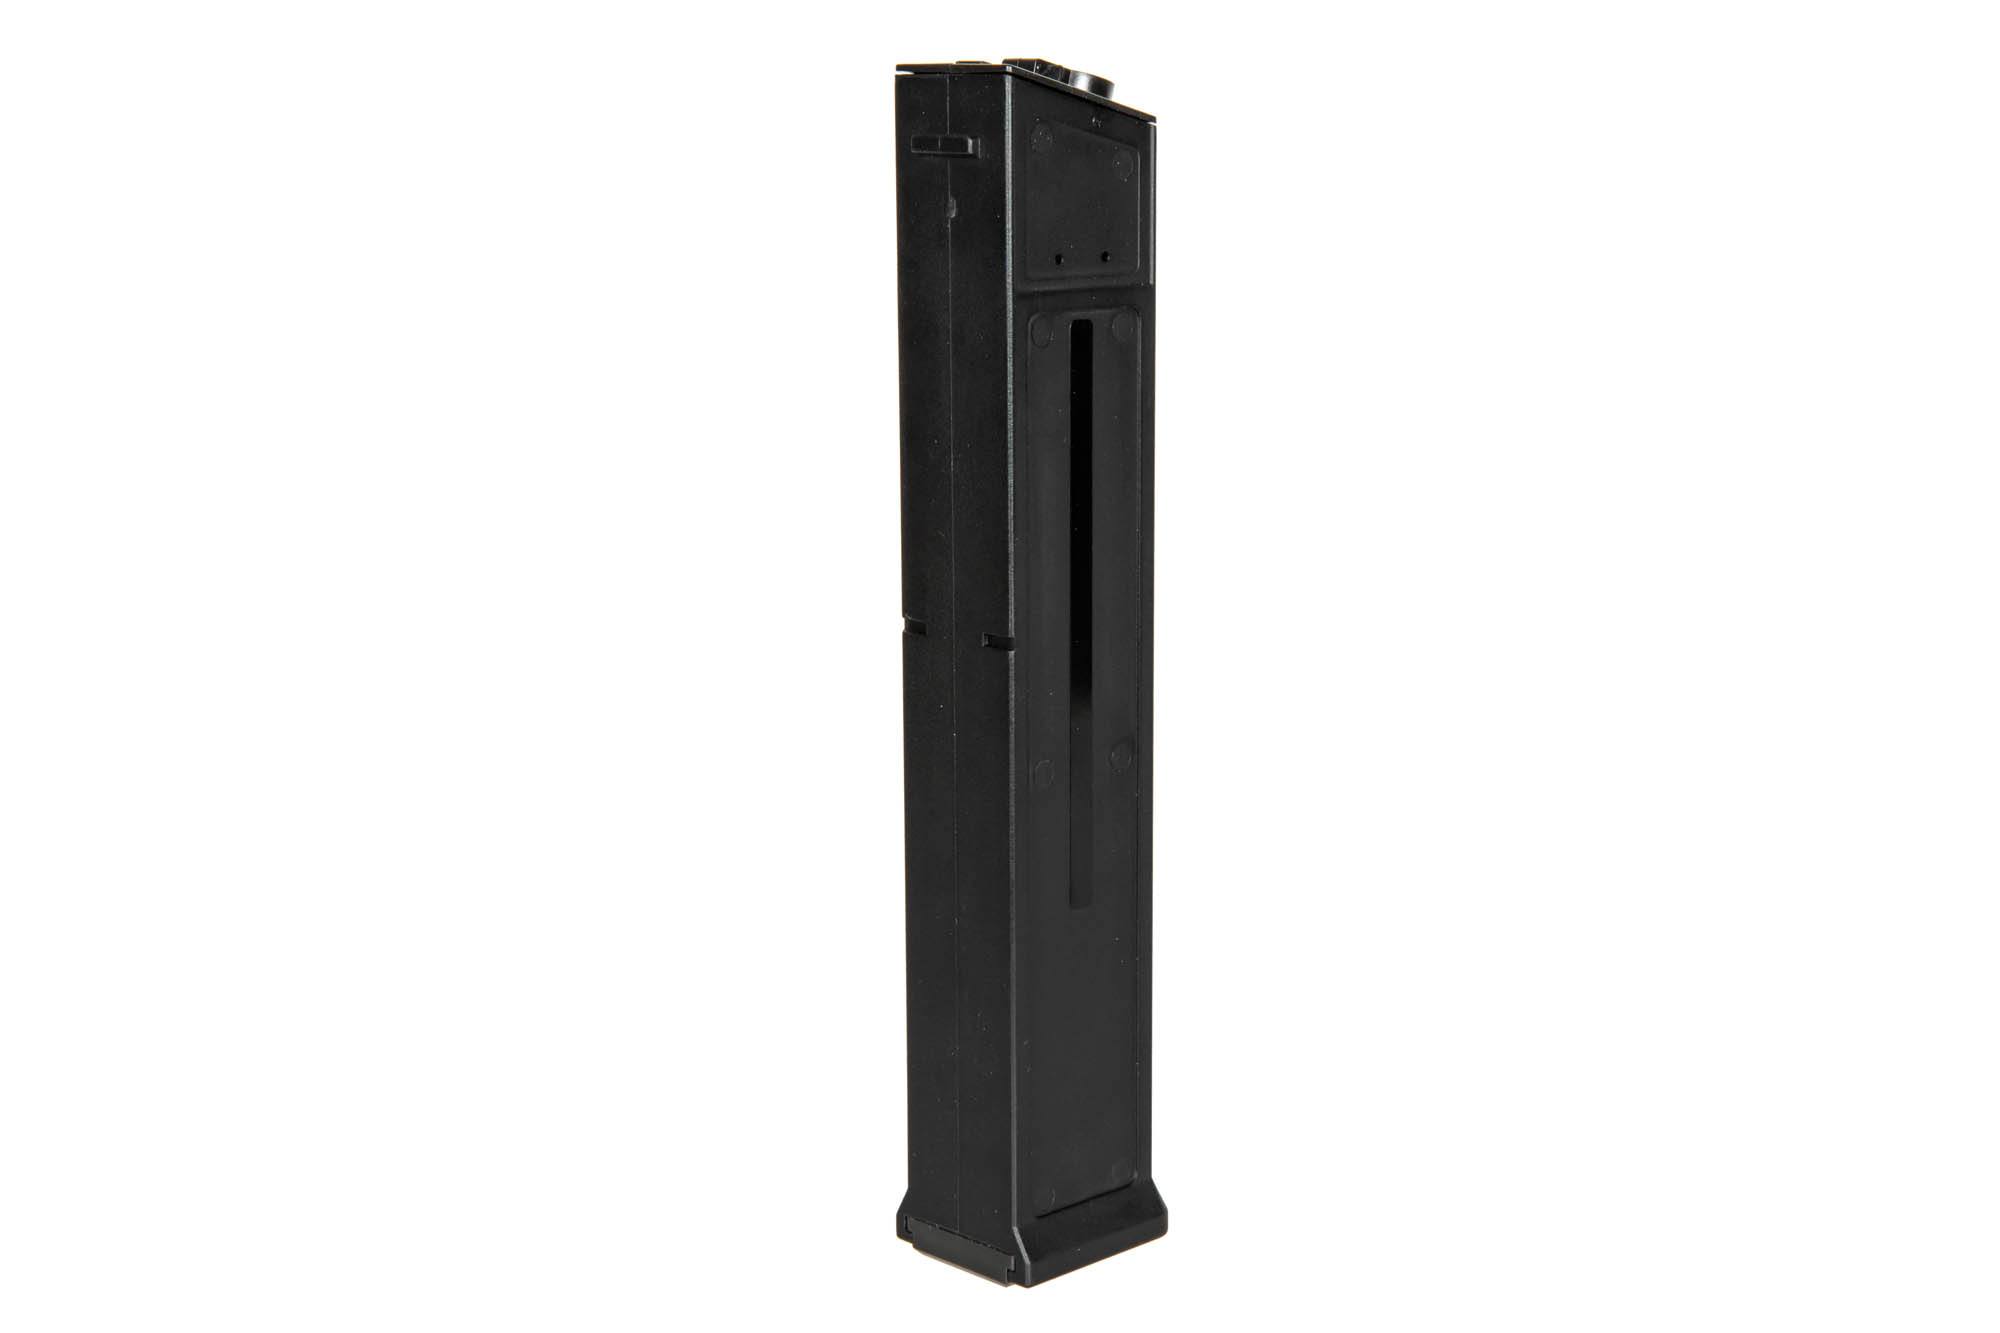 520BBs Hi-Cap magazine for G&G PCC45 replicas by G&G on Airsoft Mania Europe